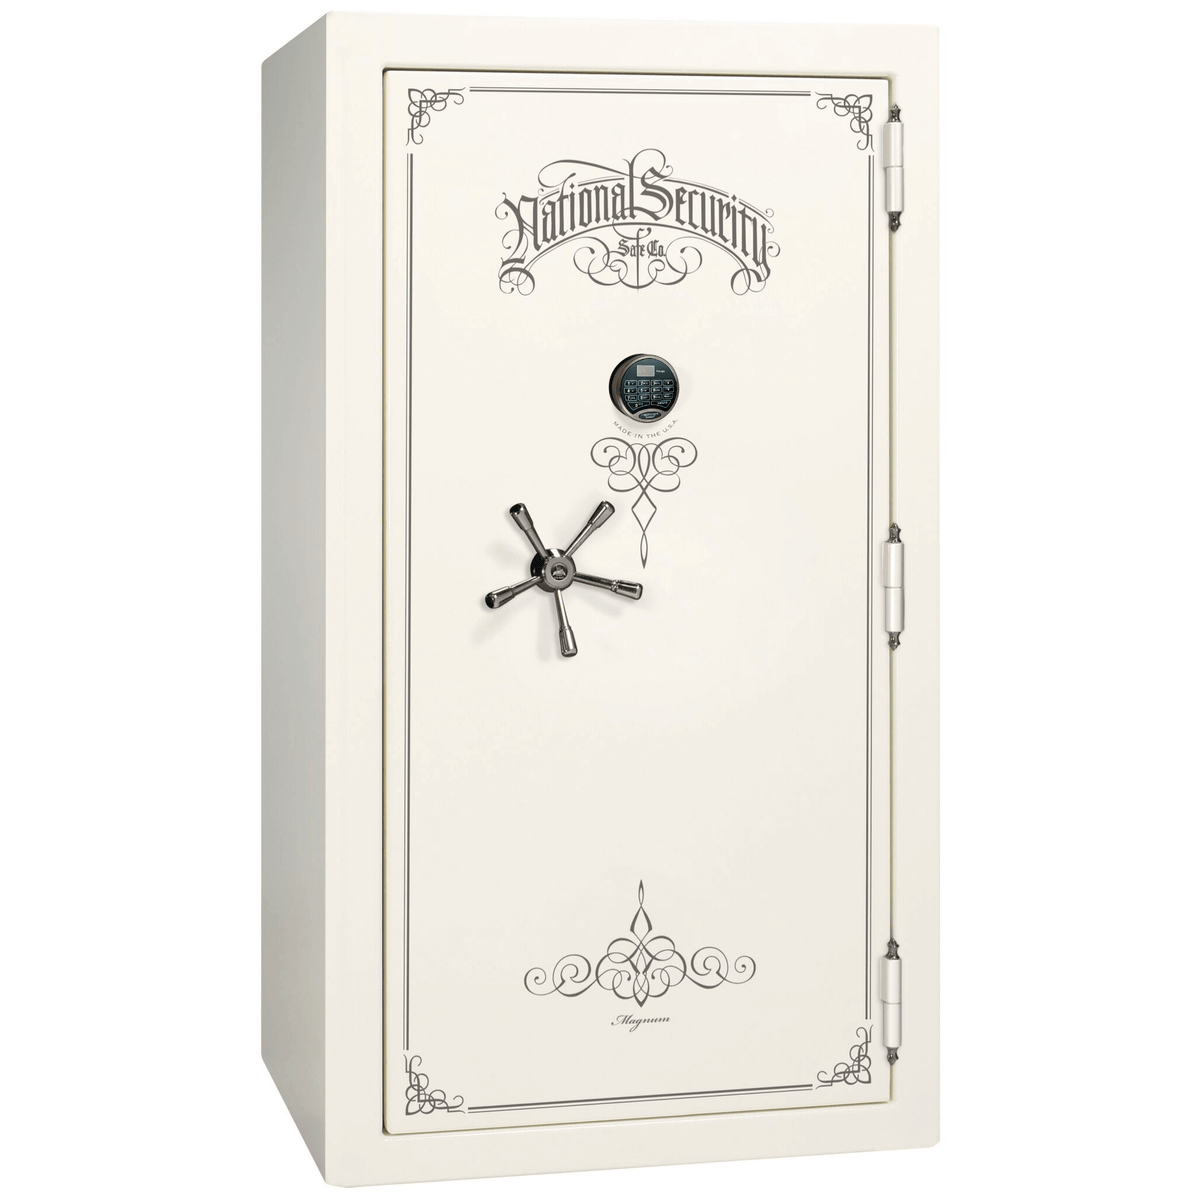 Liberty Safe National Magnum 40 in White Gloss with Black Chrome Electronic Lock, closed door.